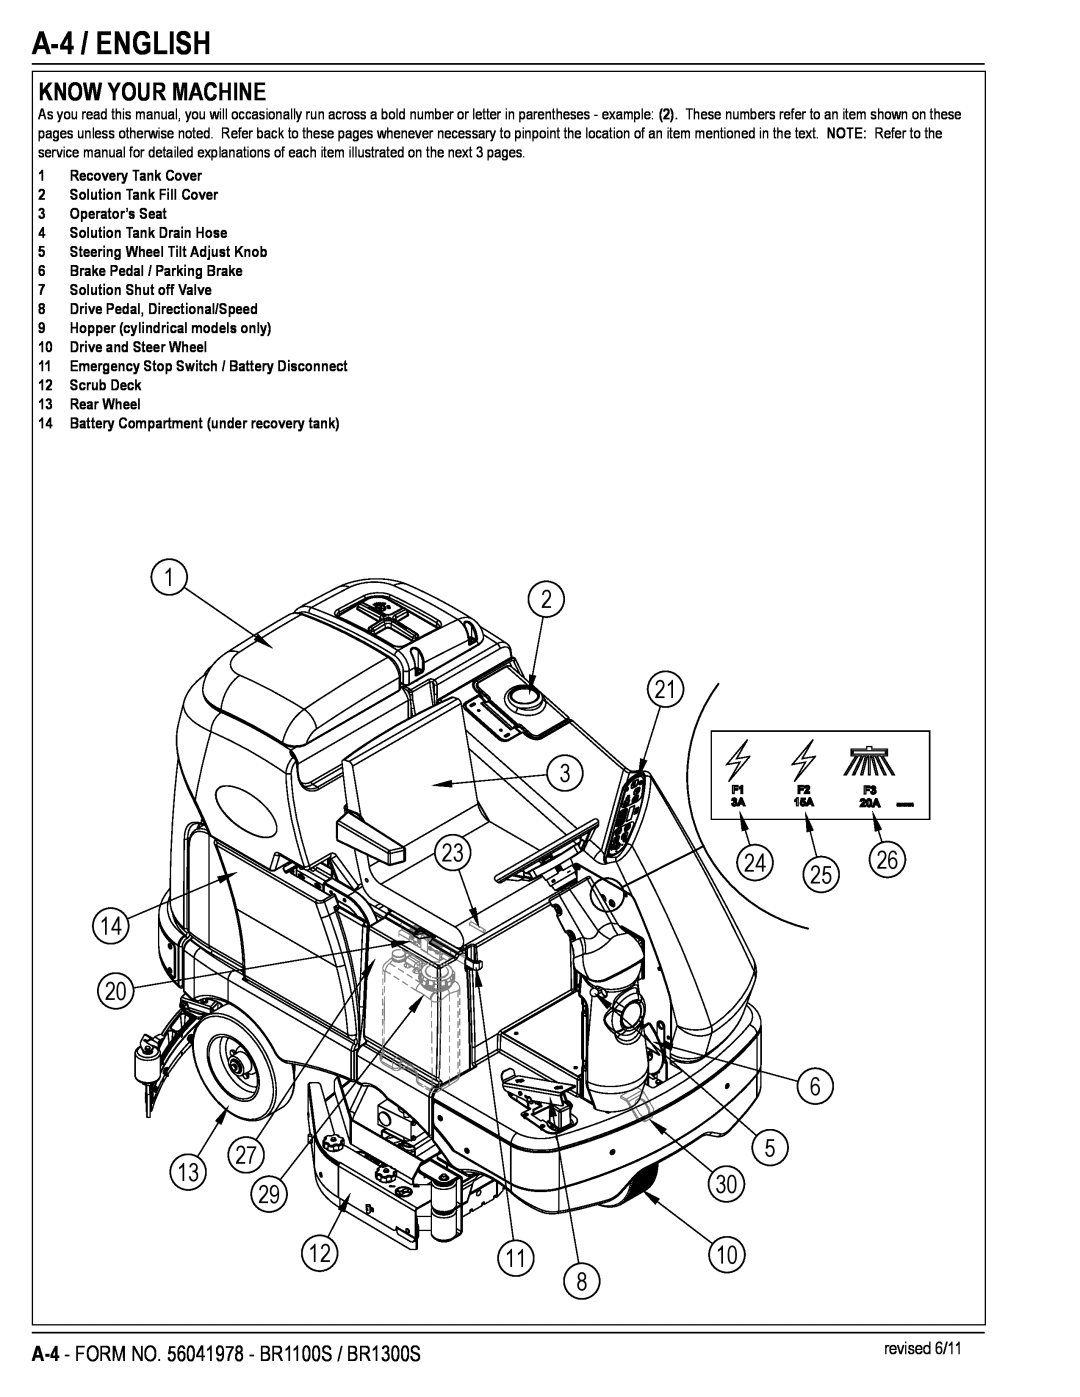 Nilfisk-Advance America BR1100S manual A-4 /ENGLISH, Know Your Machine 